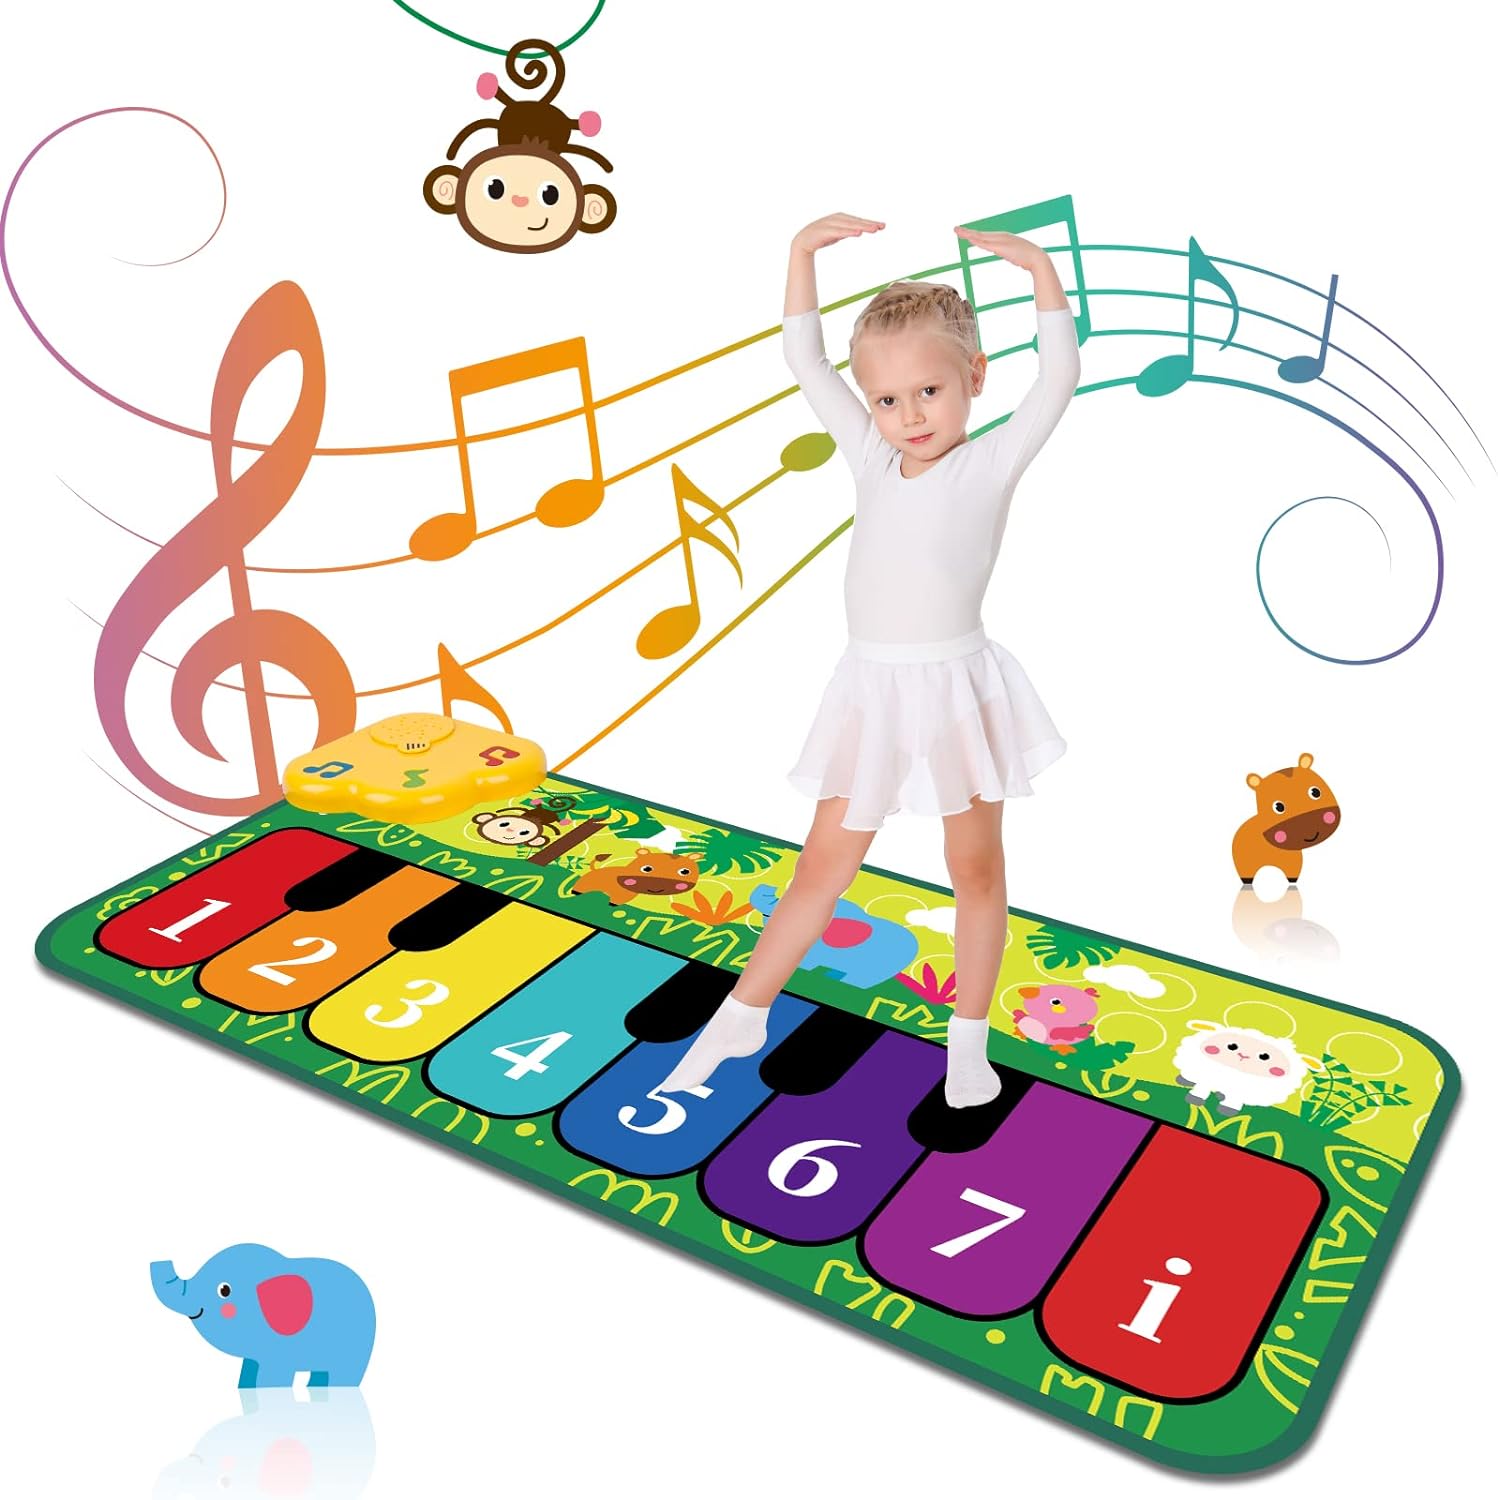 How to Engage Kids with a Piano Mat. The Best Steps to Guide Children Through Musical Play